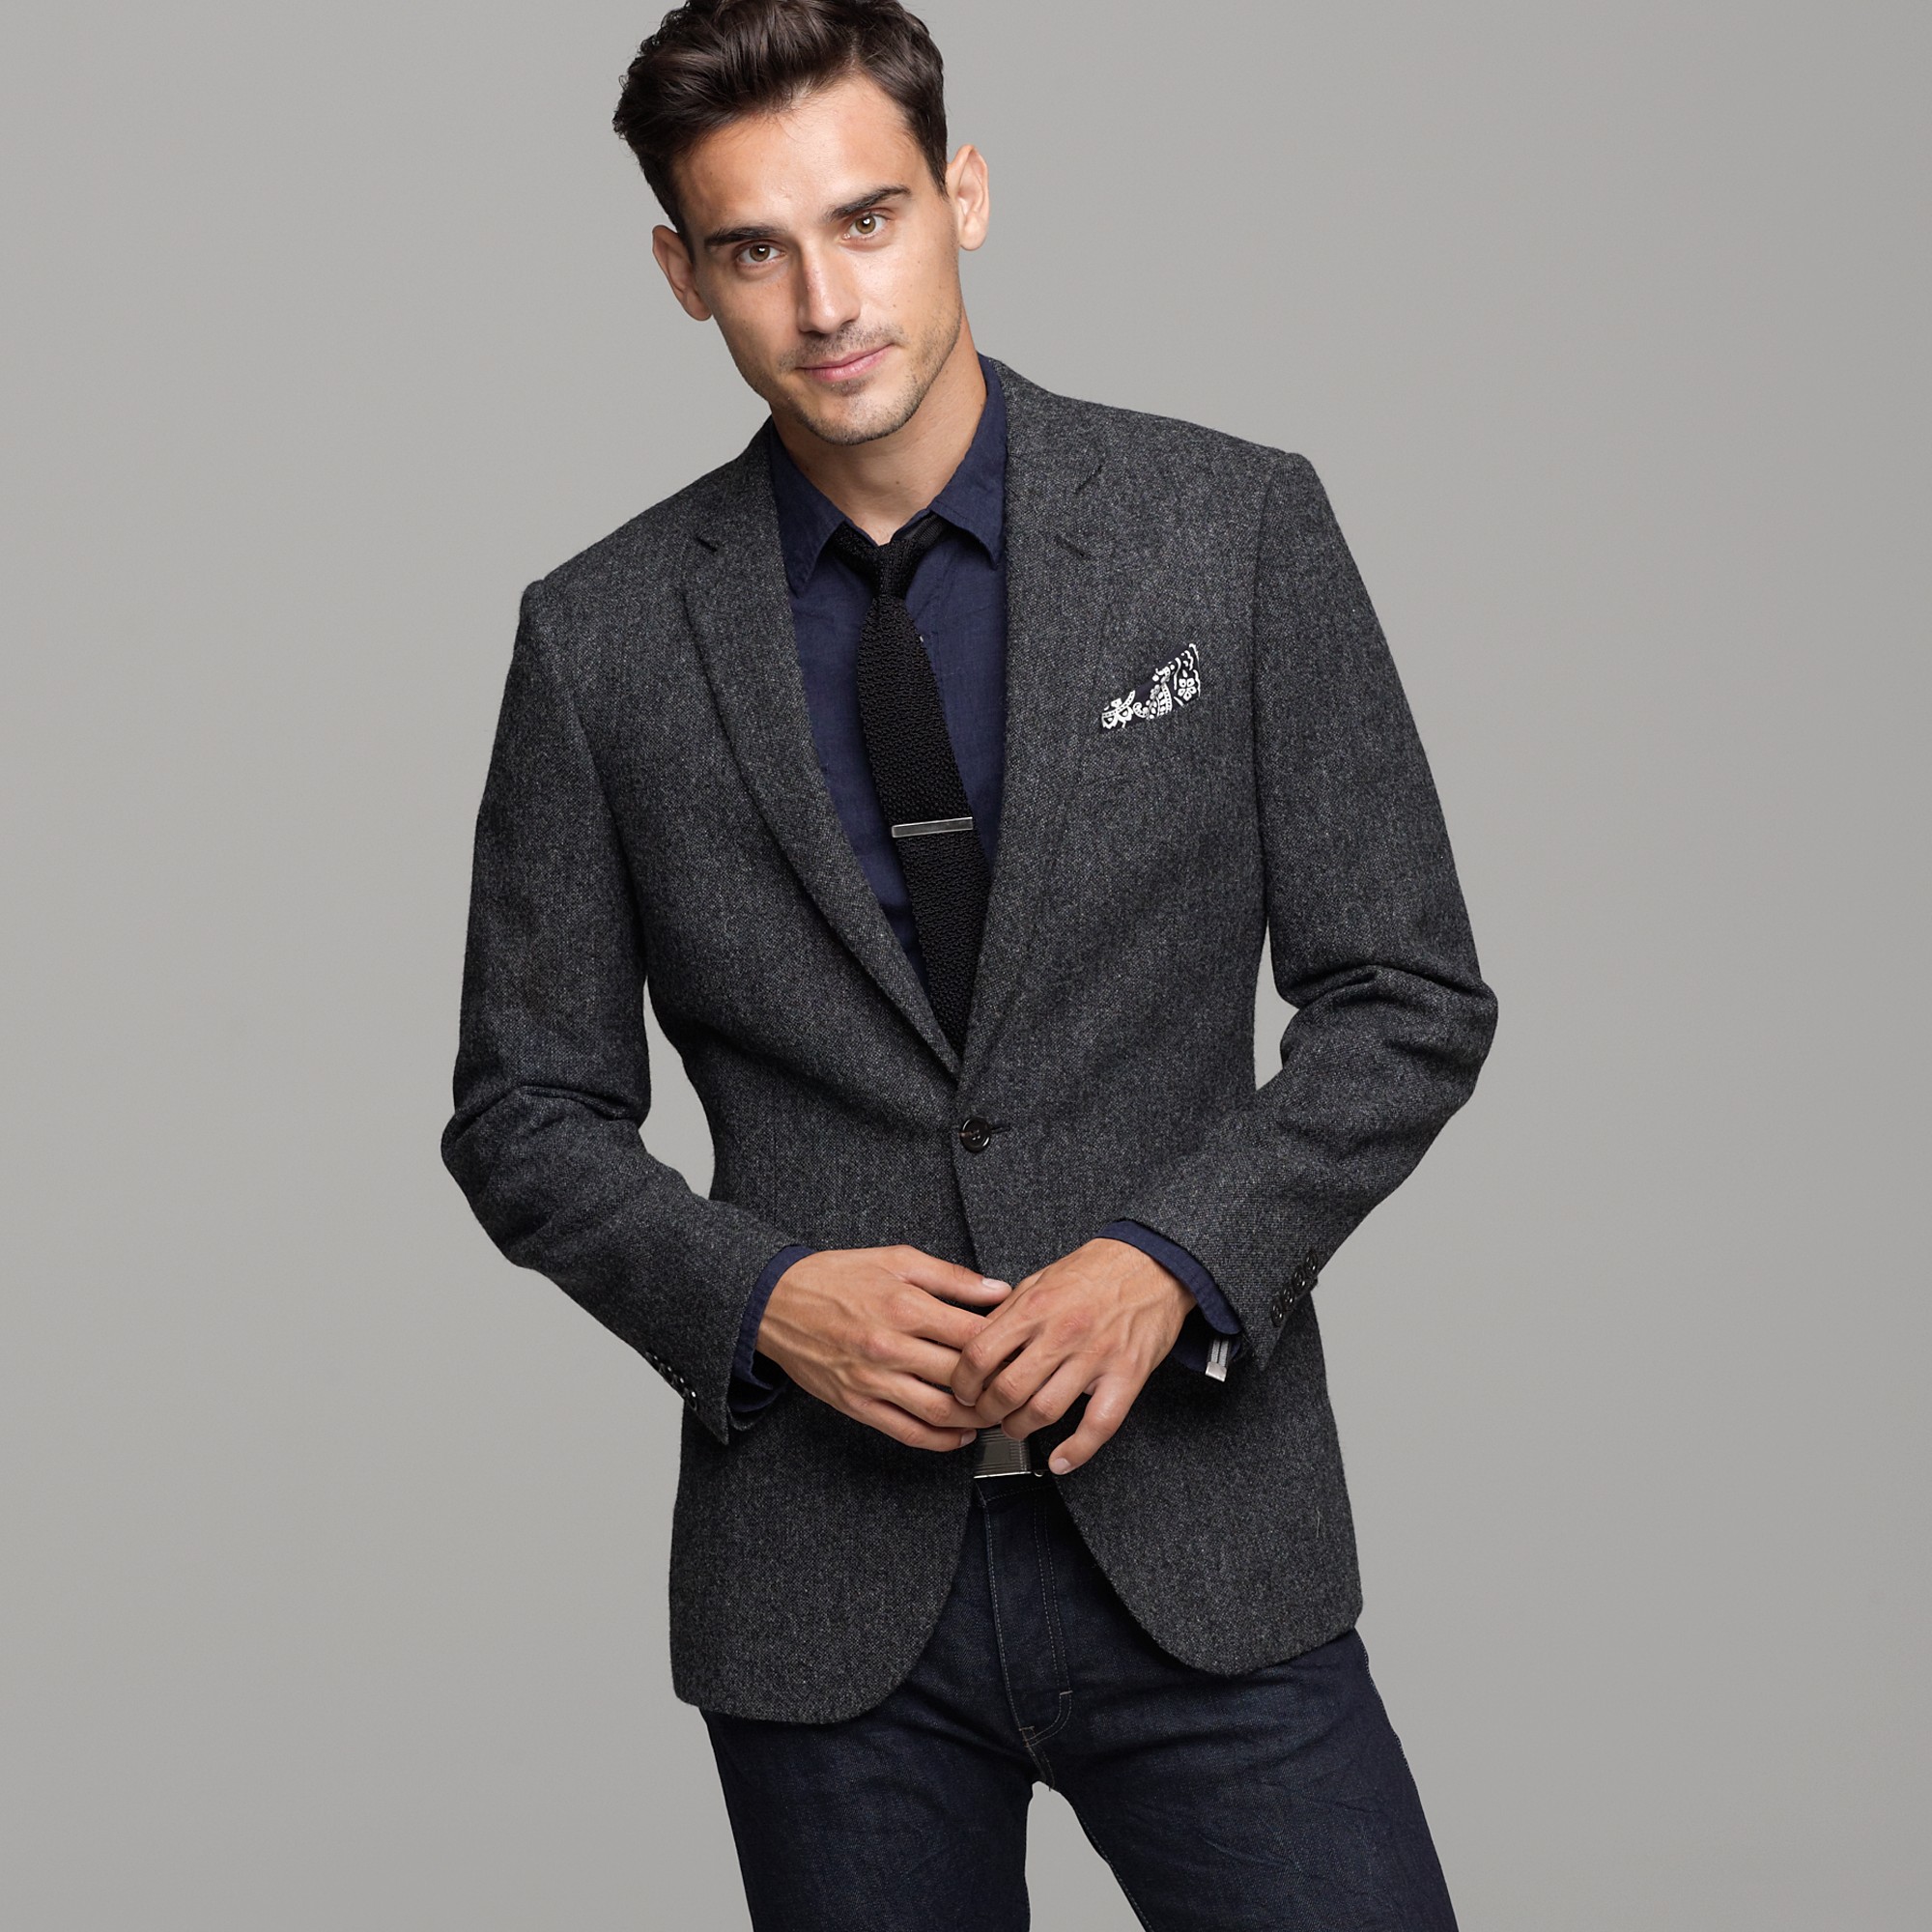 J.crew Ludlow Two-button Suit Jacket with Double-vented Back in Birds ...